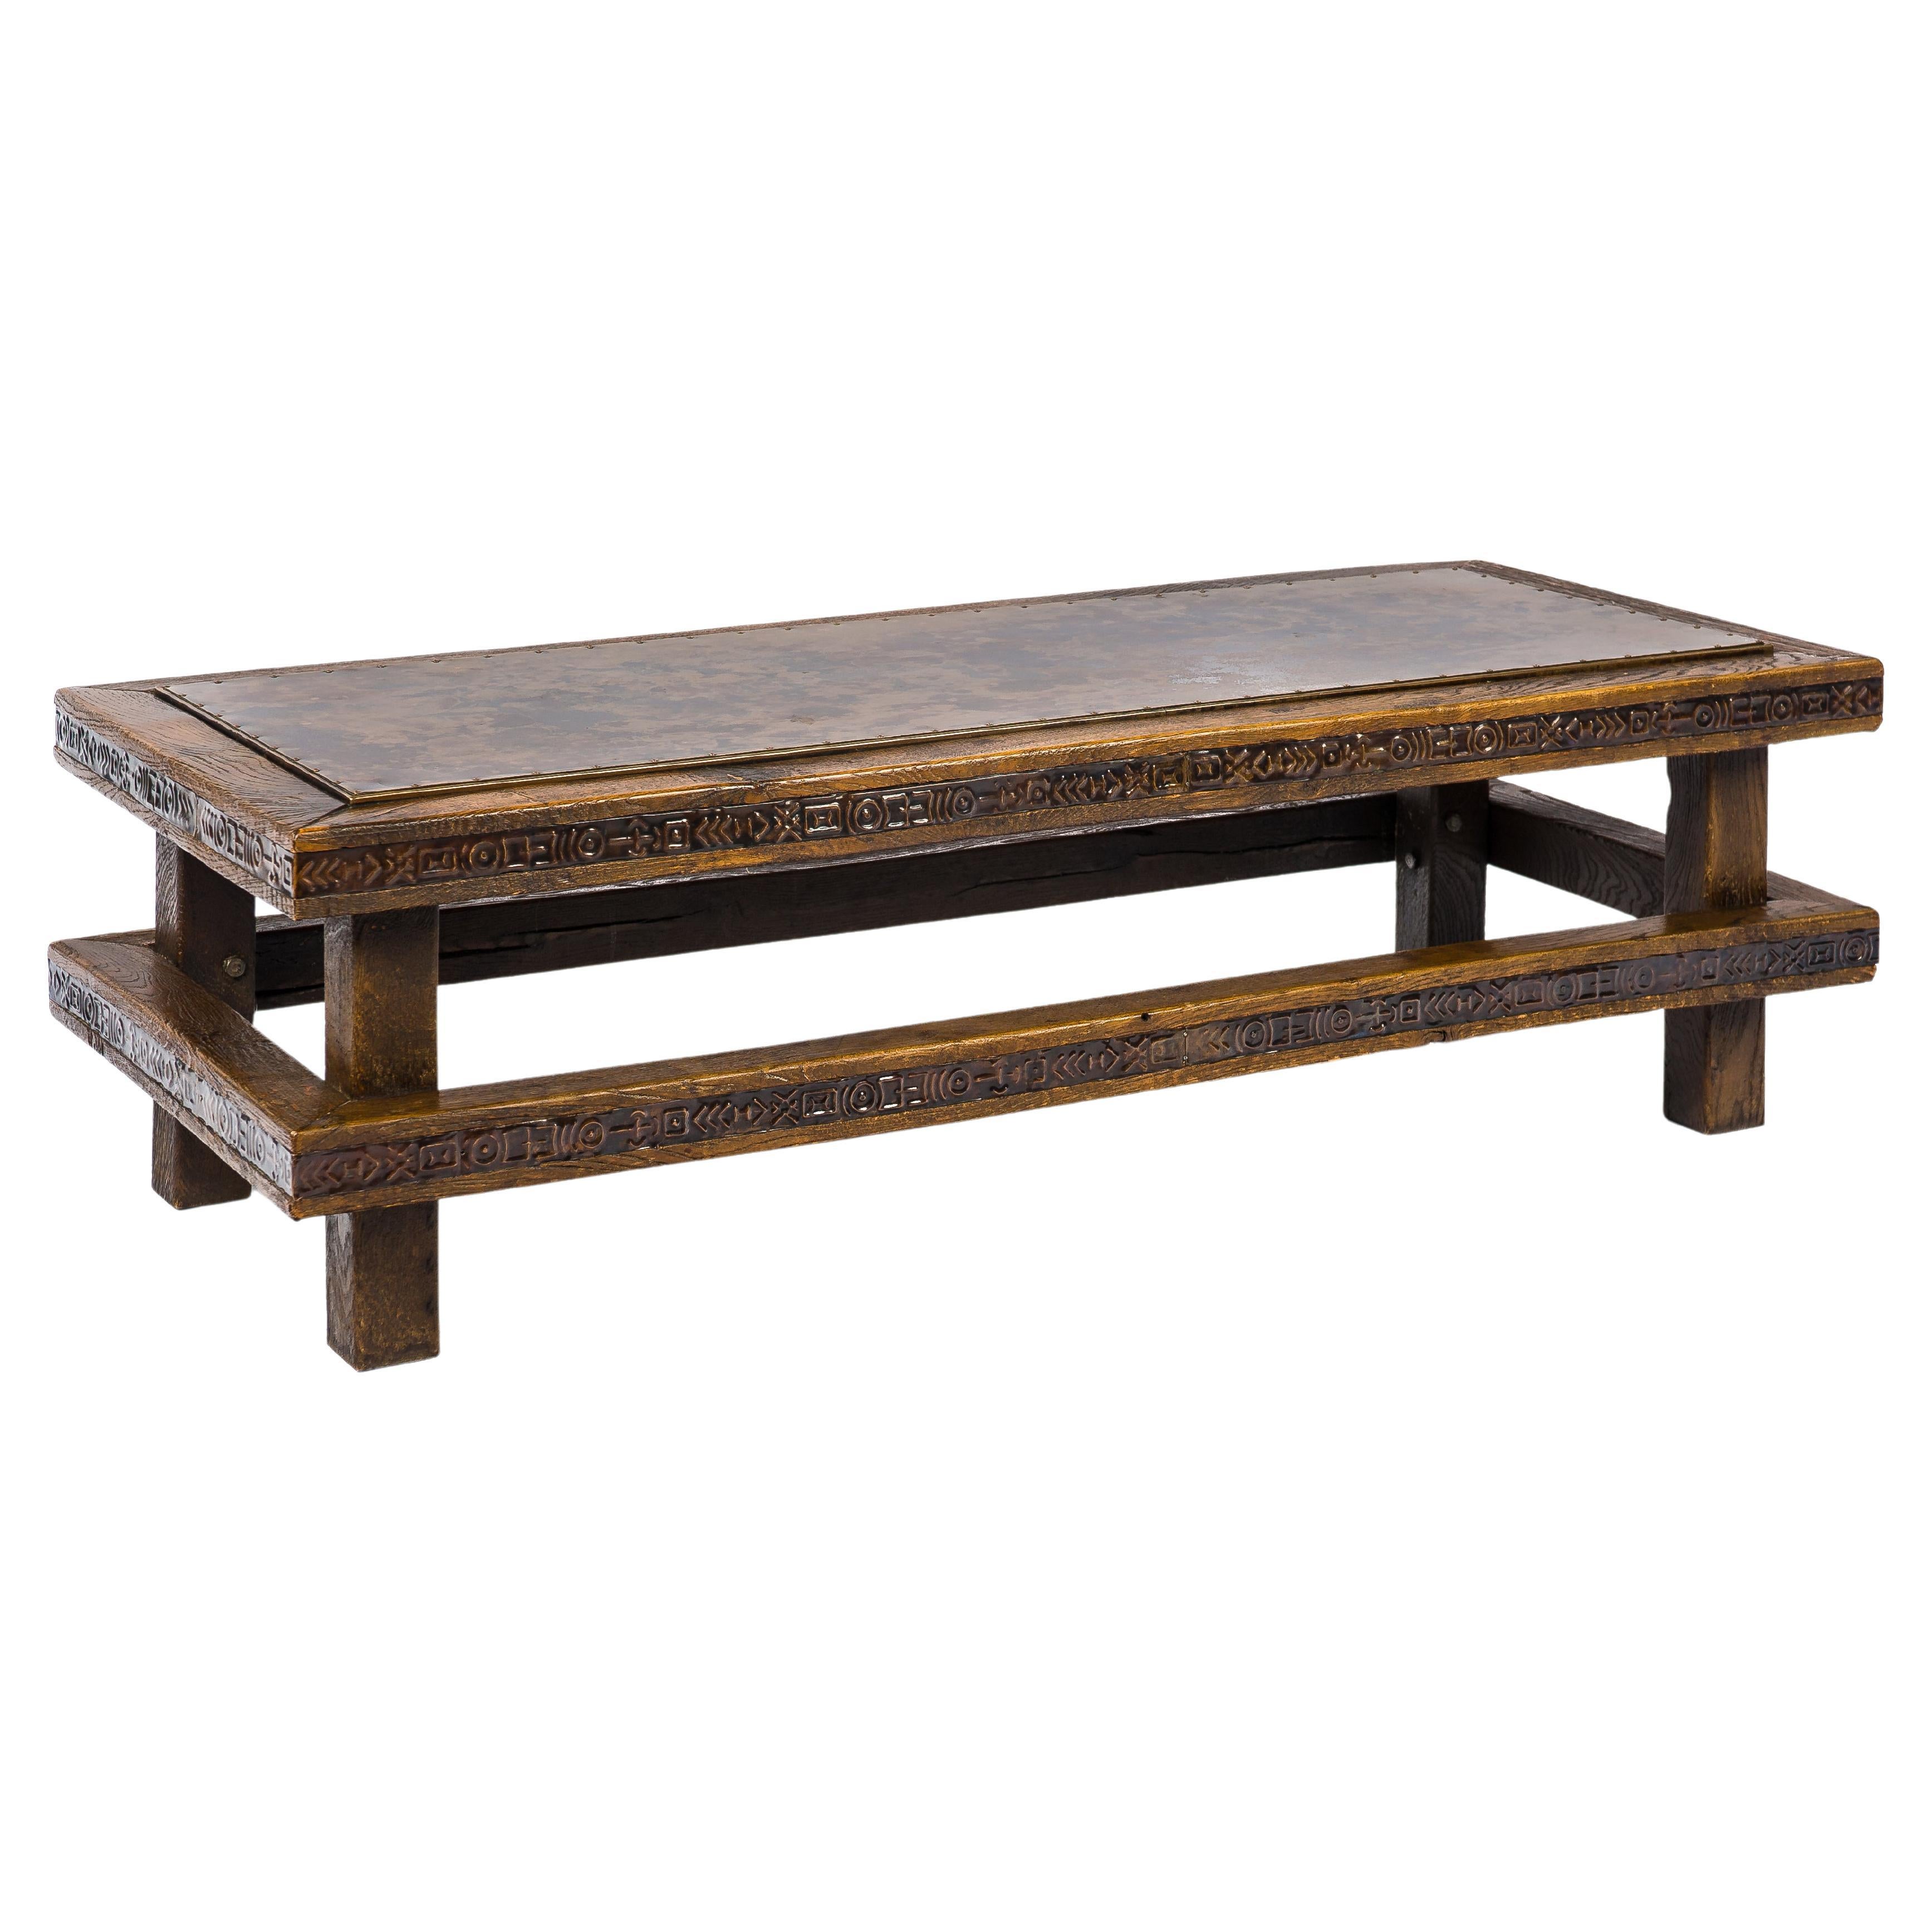 Midcentury Solid Oak Brutalist Dutch Coffee Table with Copper Top and Inlay For Sale